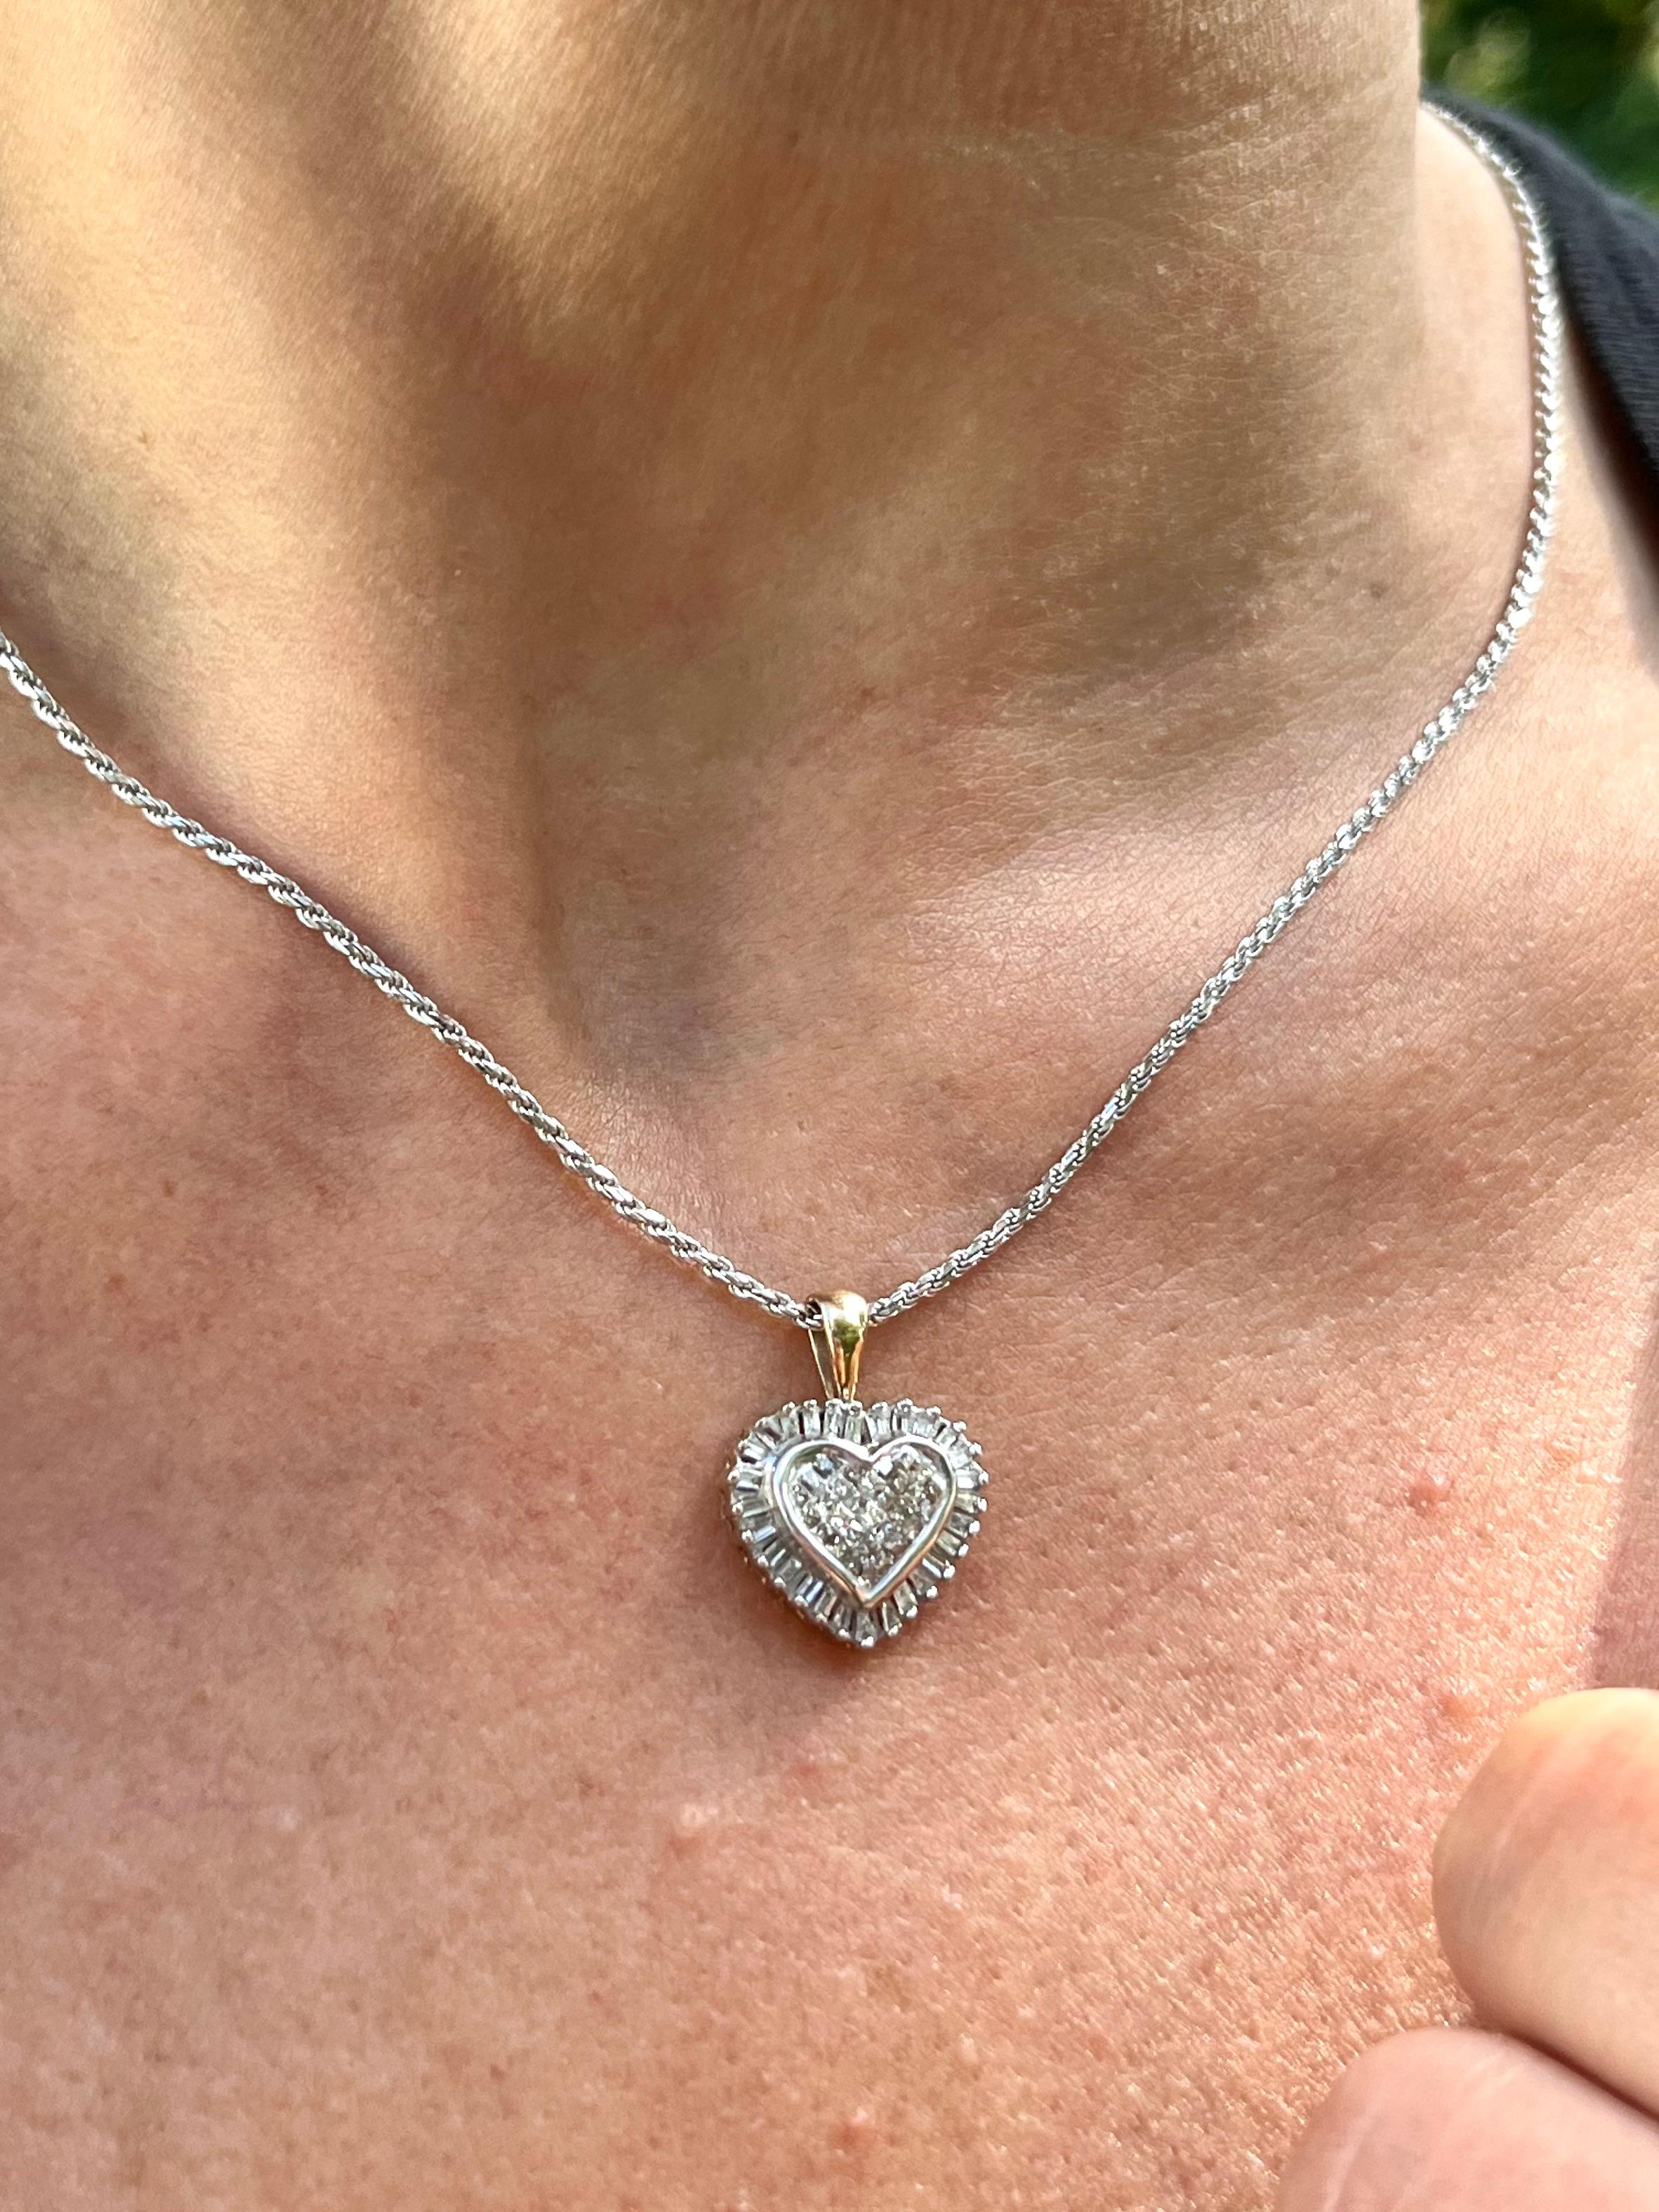 This stunning heart shape pendant features 0.70 carats in round and baguette-cut natural diamonds. The ideal fine jewelry gift at an affordable price. Solid gold, natural diamonds, and double rhodium-plated finish make this an ideal pendant for